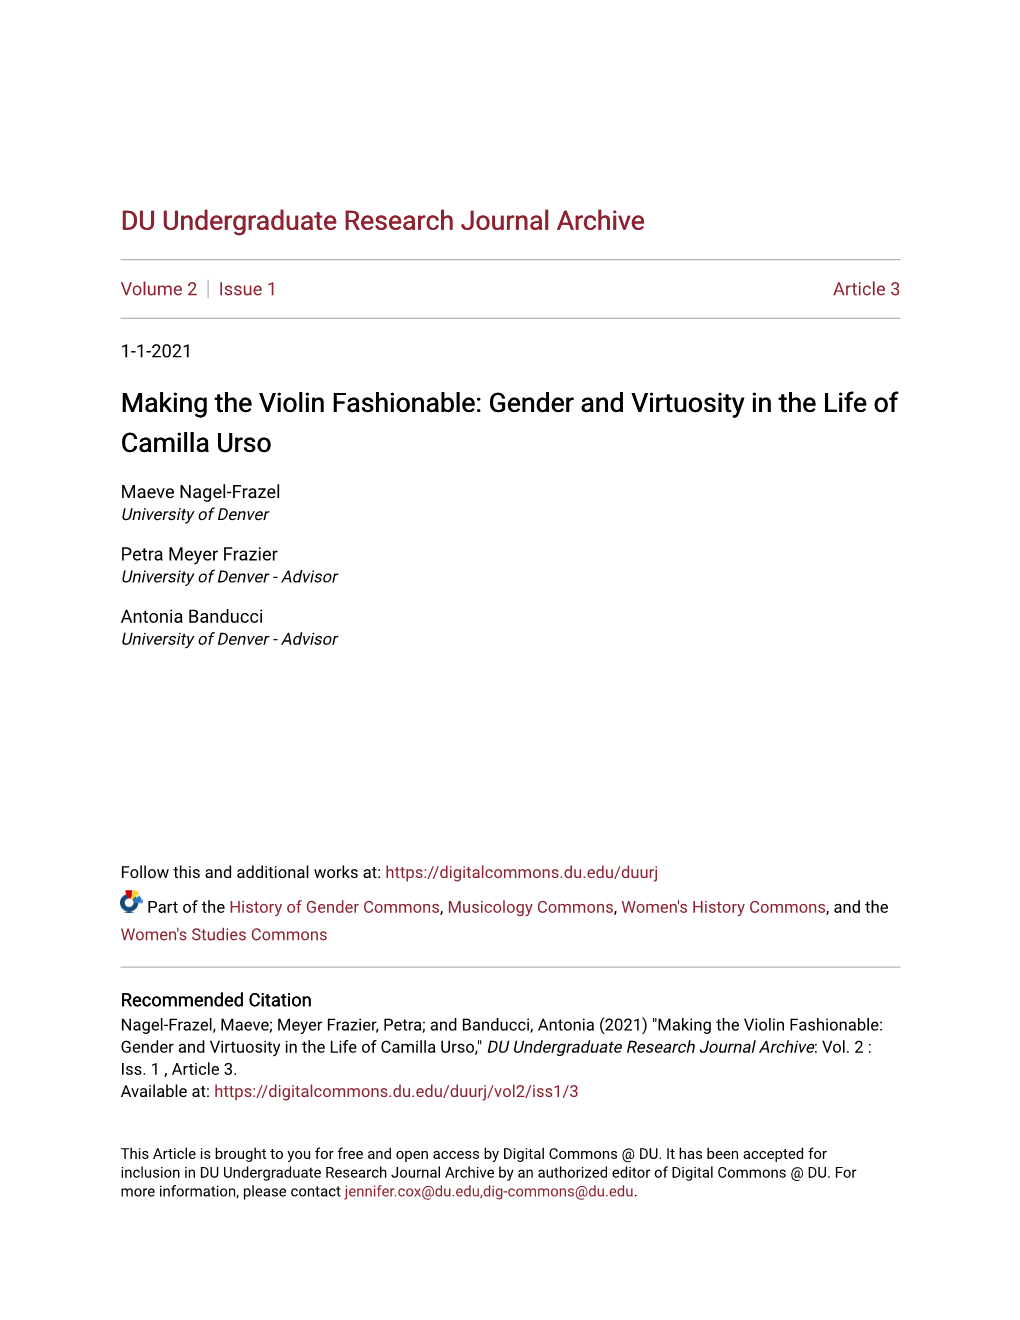 Making the Violin Fashionable: Gender and Virtuosity in the Life of Camilla Urso